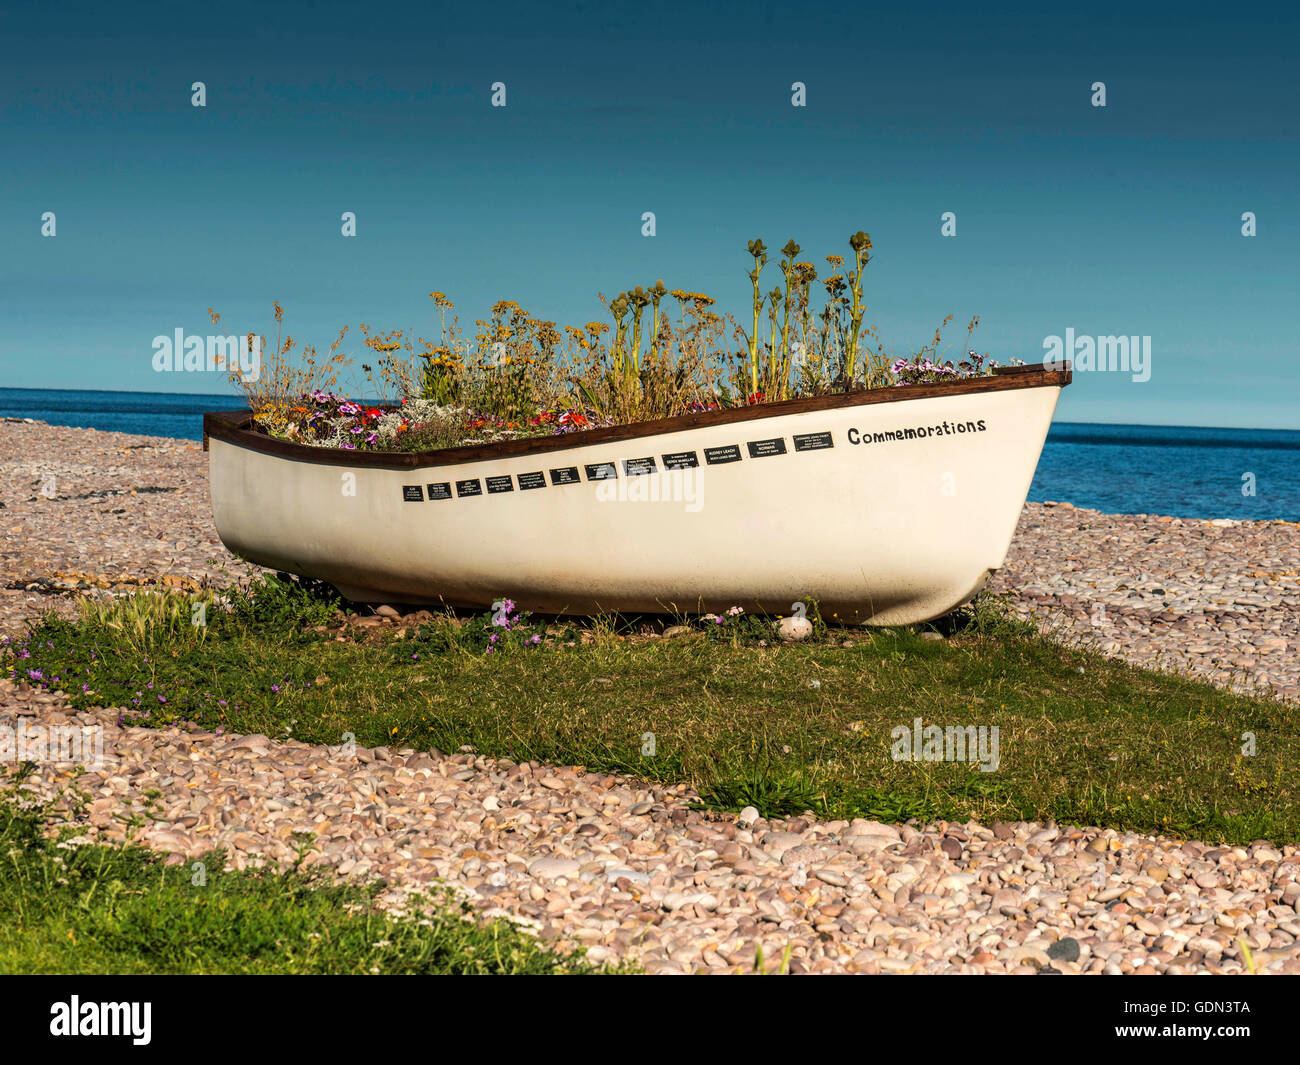 Seaside summer scene, depicting a blue ocean background with commemorative boat in the mid-ground and a pebble beach foreground. Stock Photo